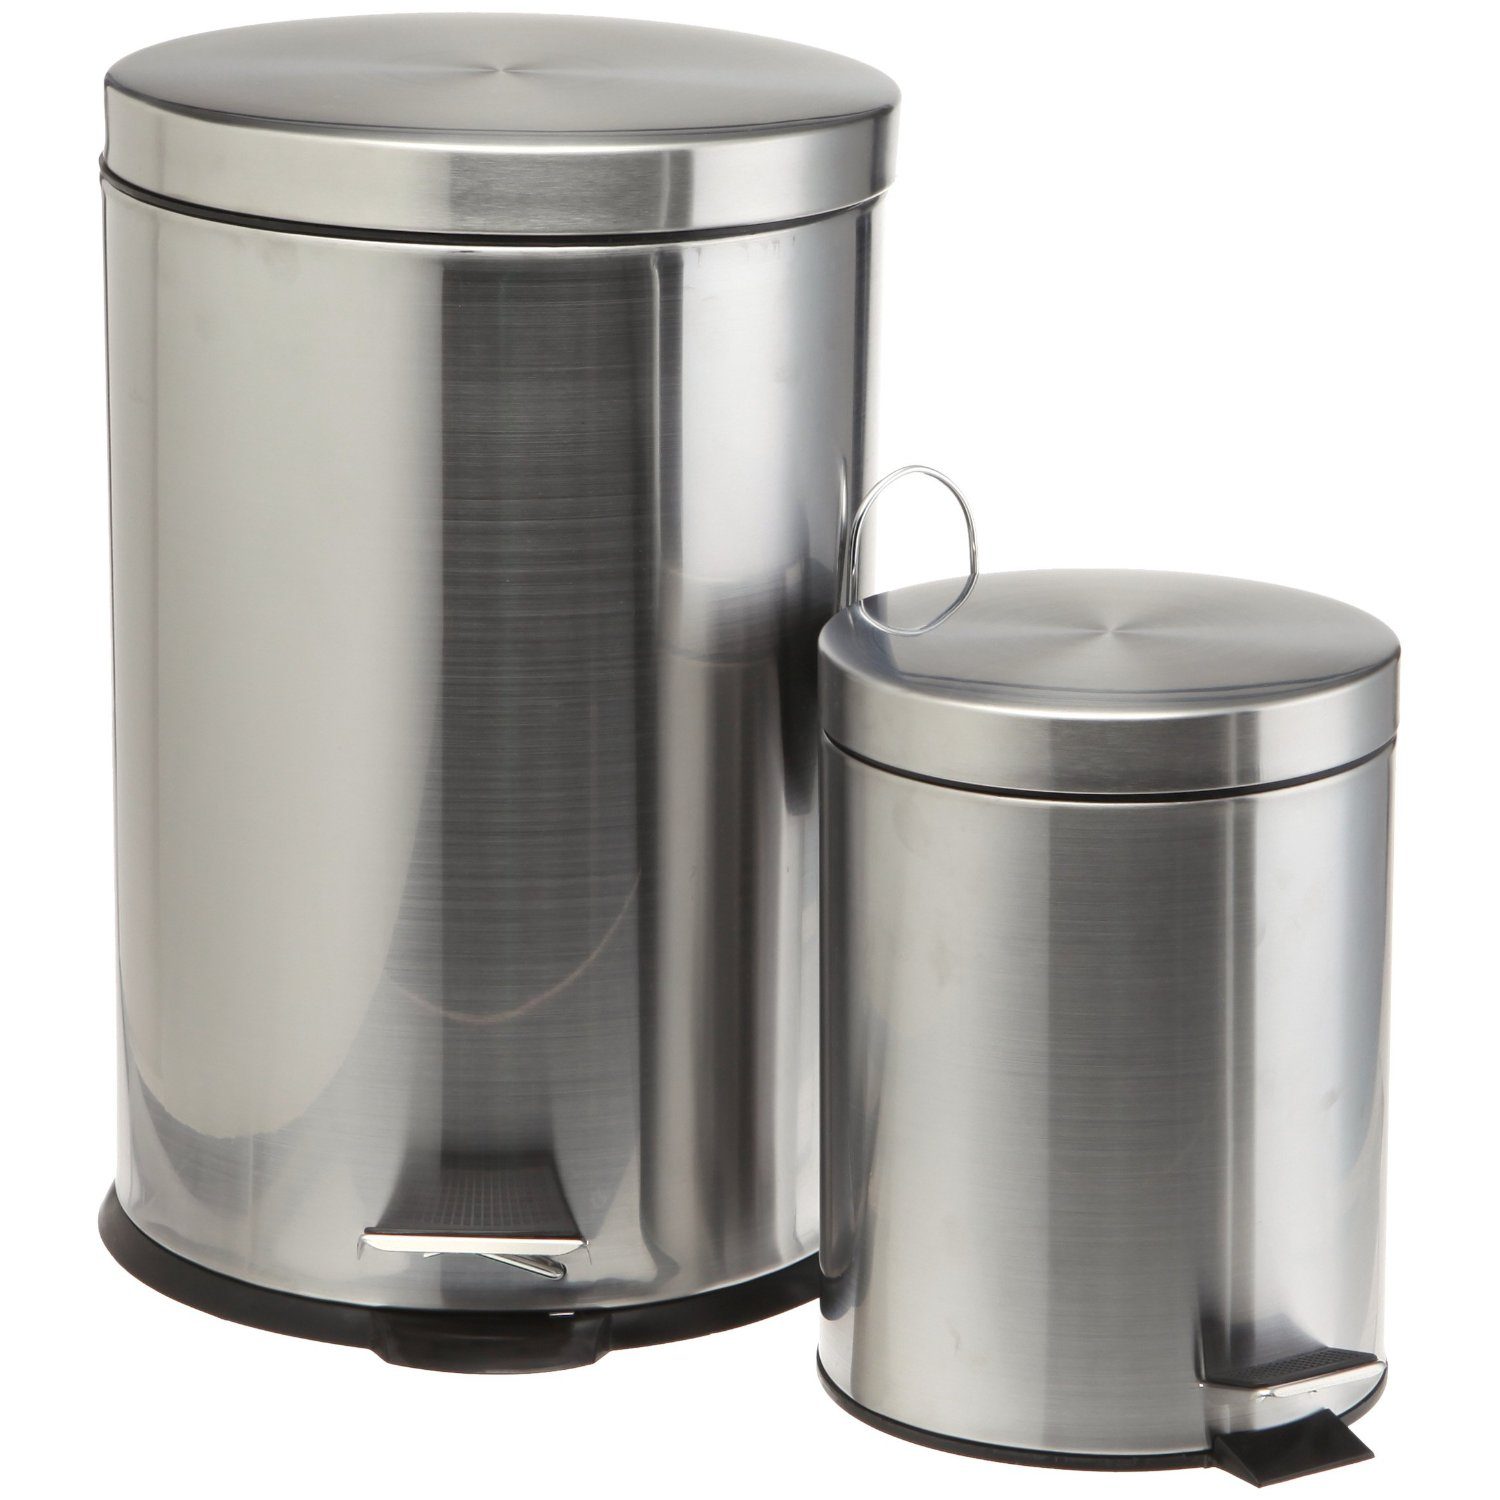 Pro Cook Stainless Steel Trash Cans